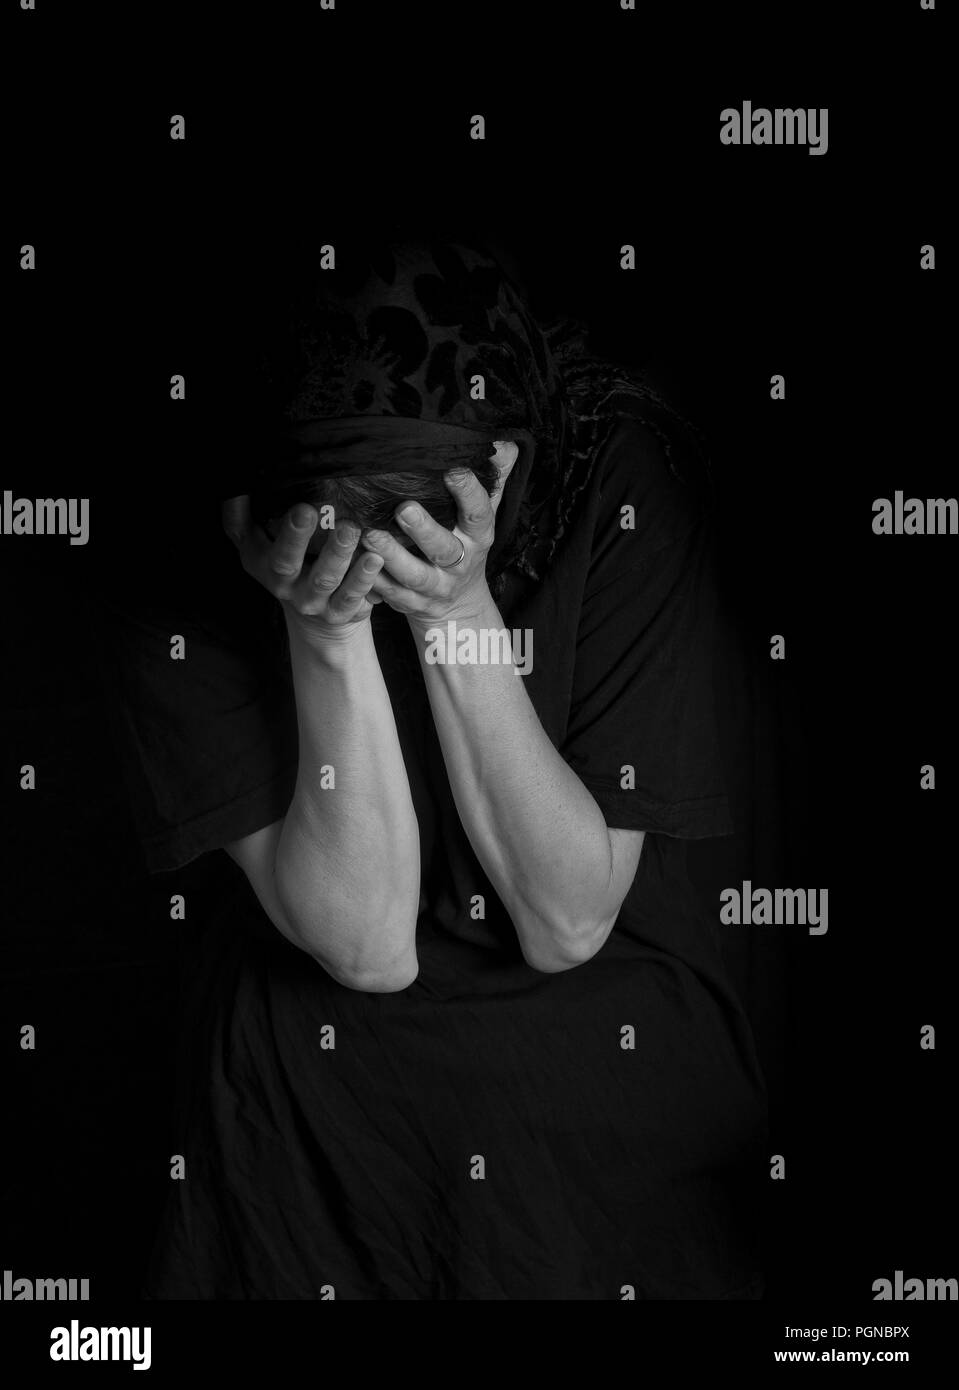 Woman sitting with her hands covering her face - concept of sorrow (monochrome image) Stock Photo